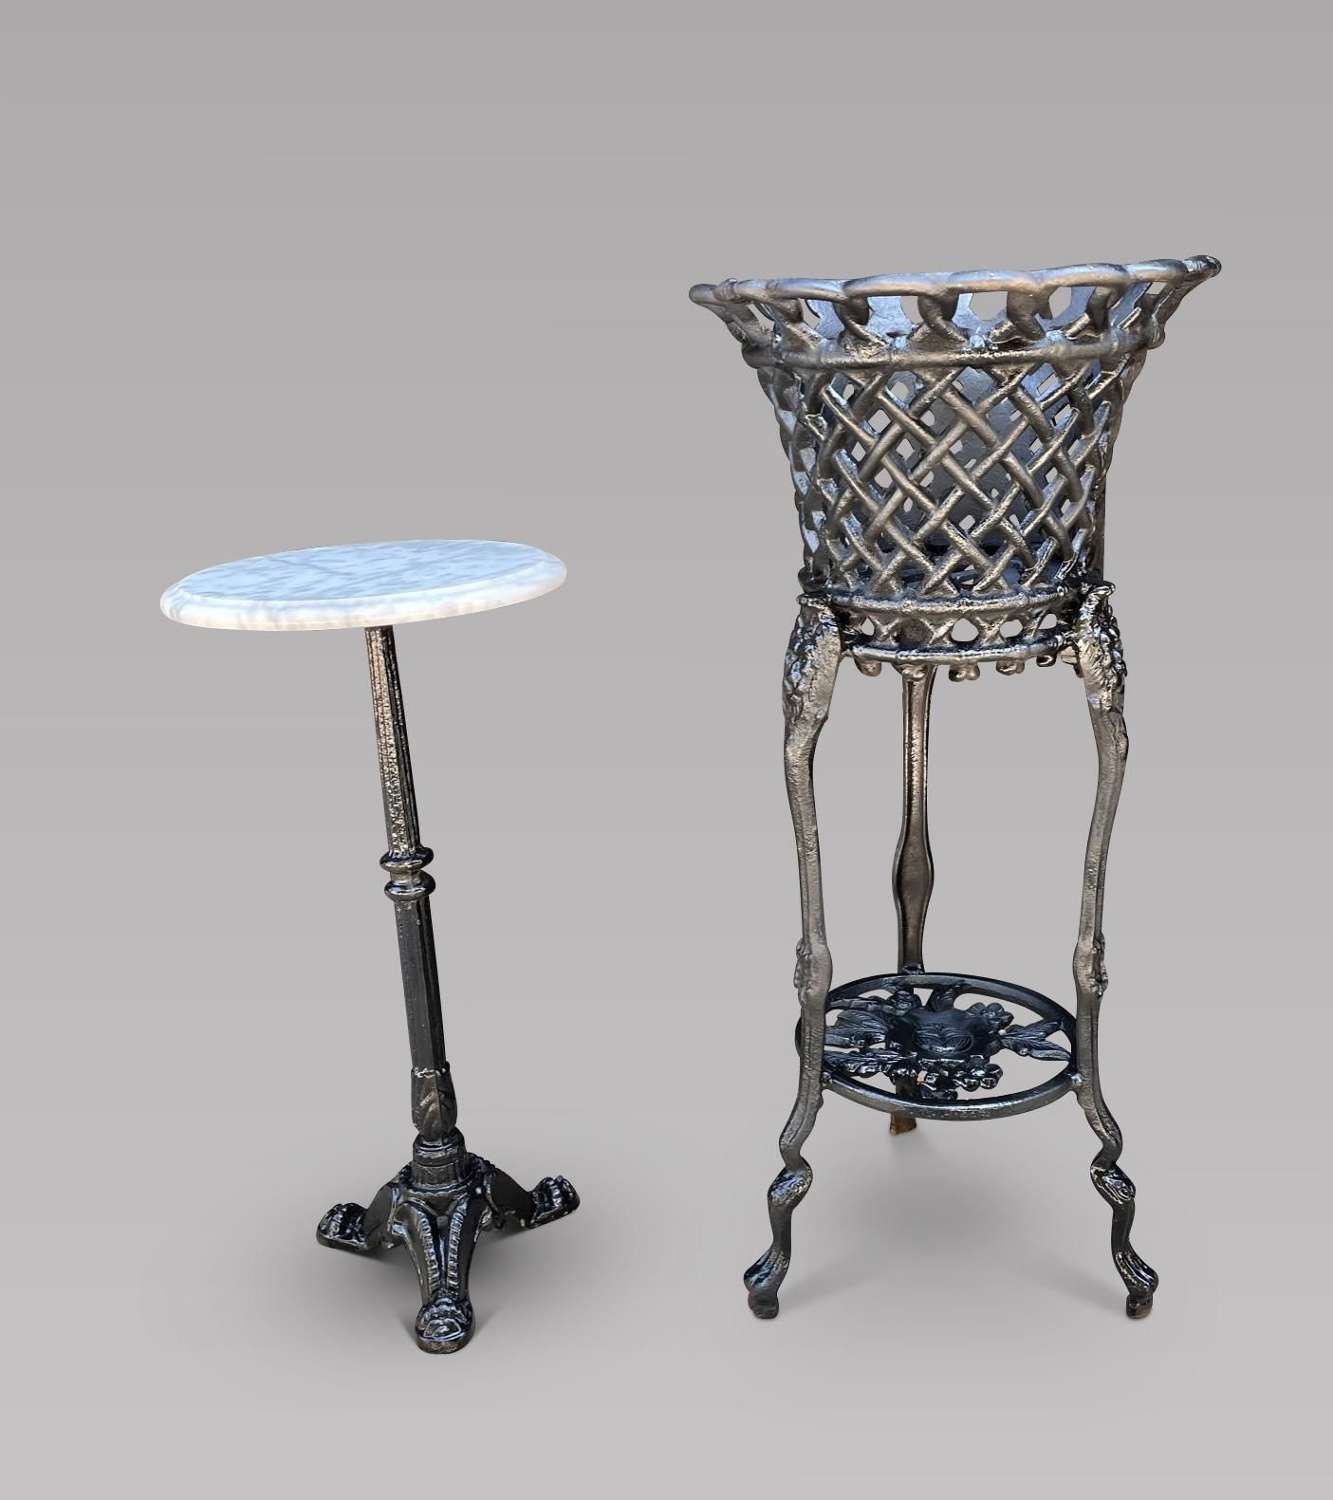 A 19th Century Wrought Iron Planter and Seat/table